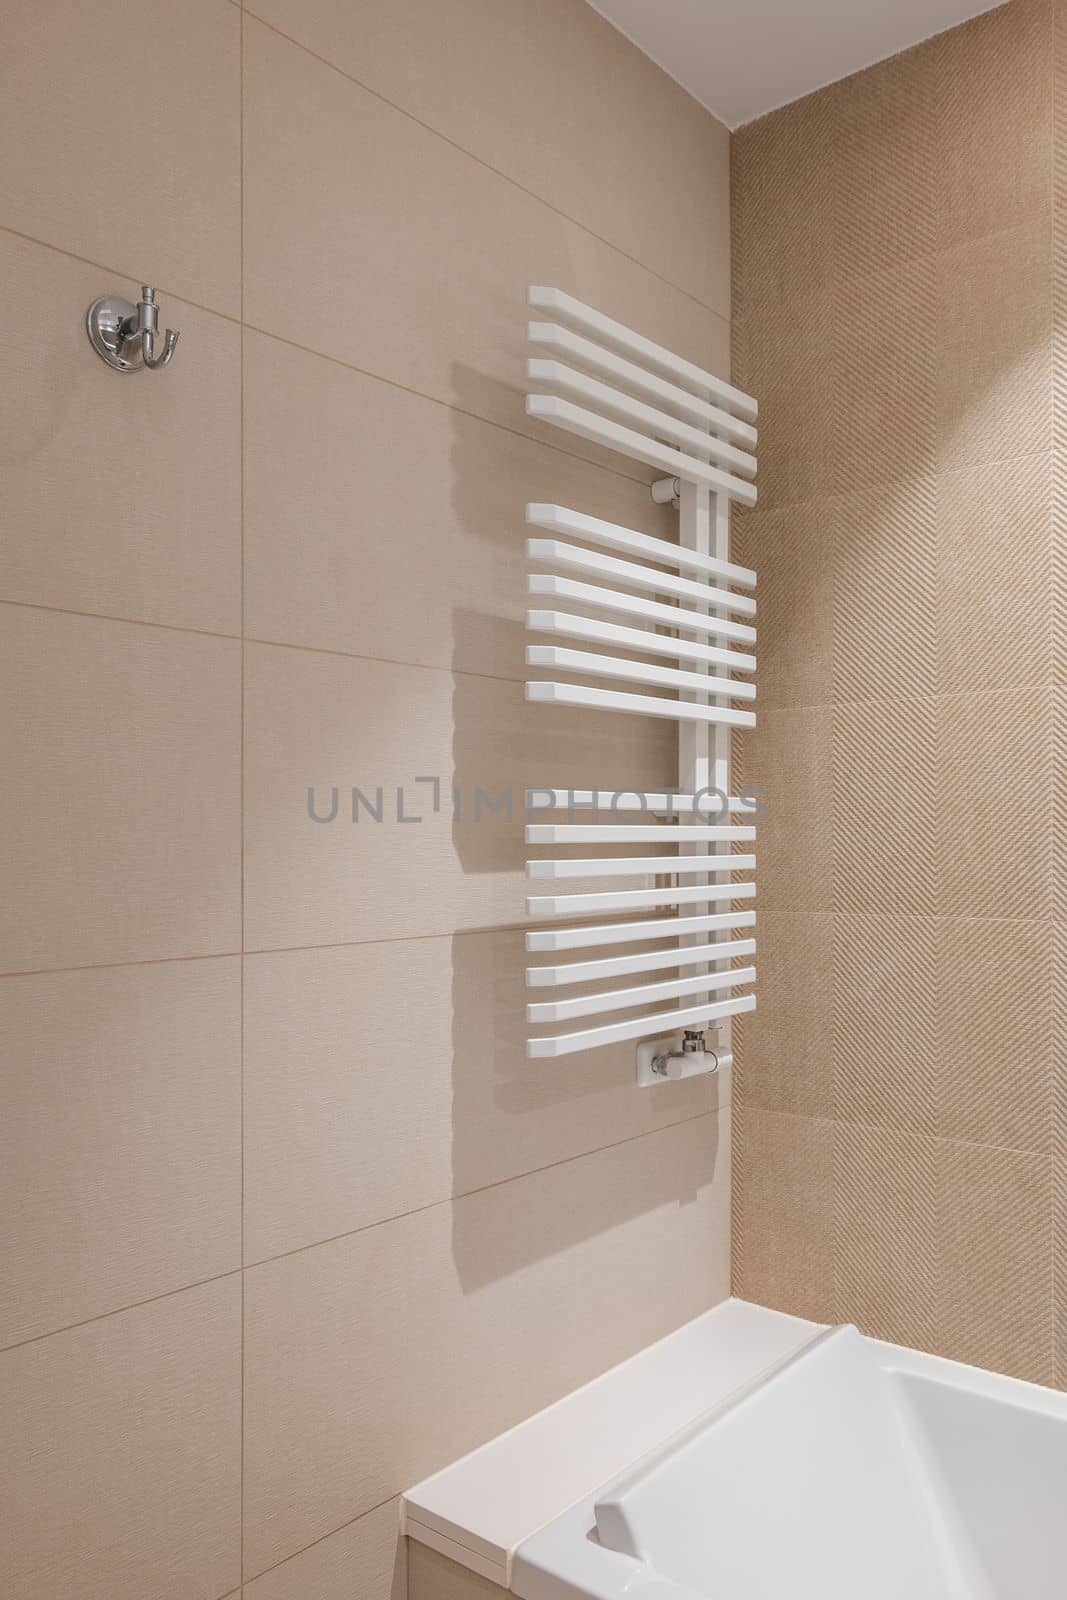 Corner of bathroom in the center with a white heating radiator on the wall for drying towels. The walls of the room are lined with beige tiles of different colors. Pure white acrylic bathtub. by apavlin